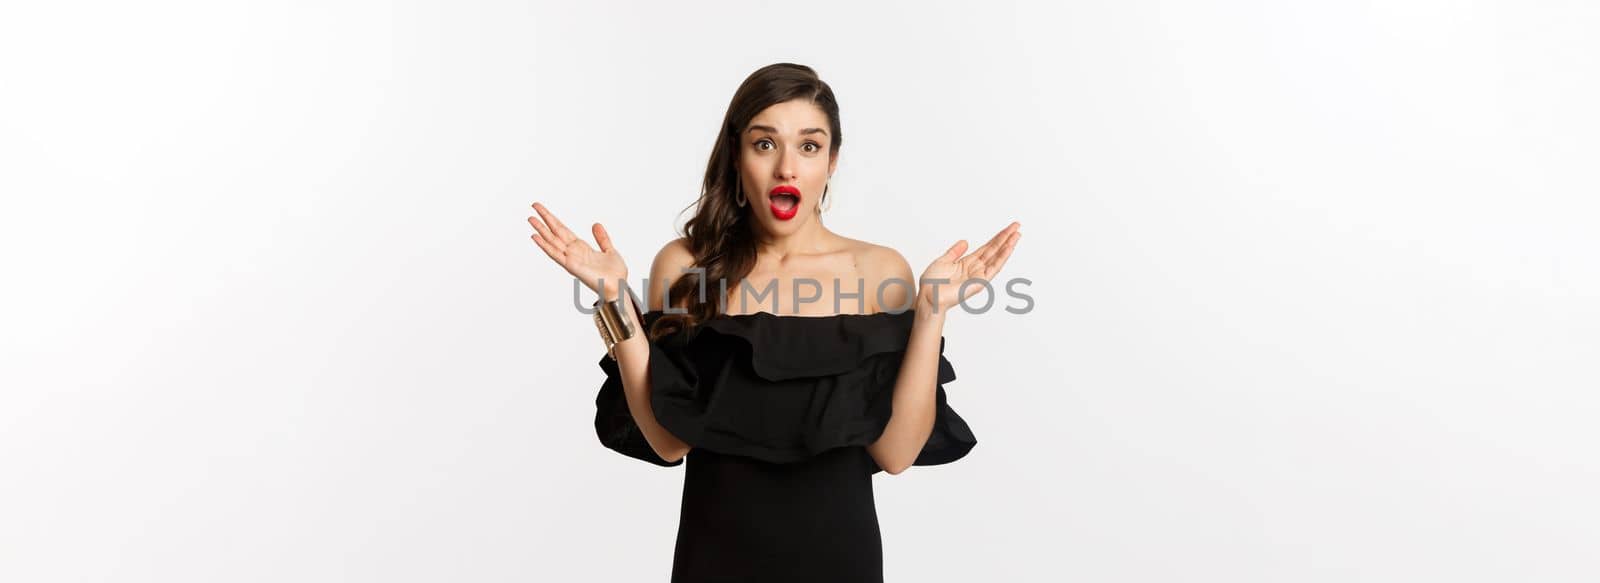 Beauty and fashion concept. Excited beautiful woman looking with amazement at surprise, reacting to good news, standing in black dress with makeup on, white background.